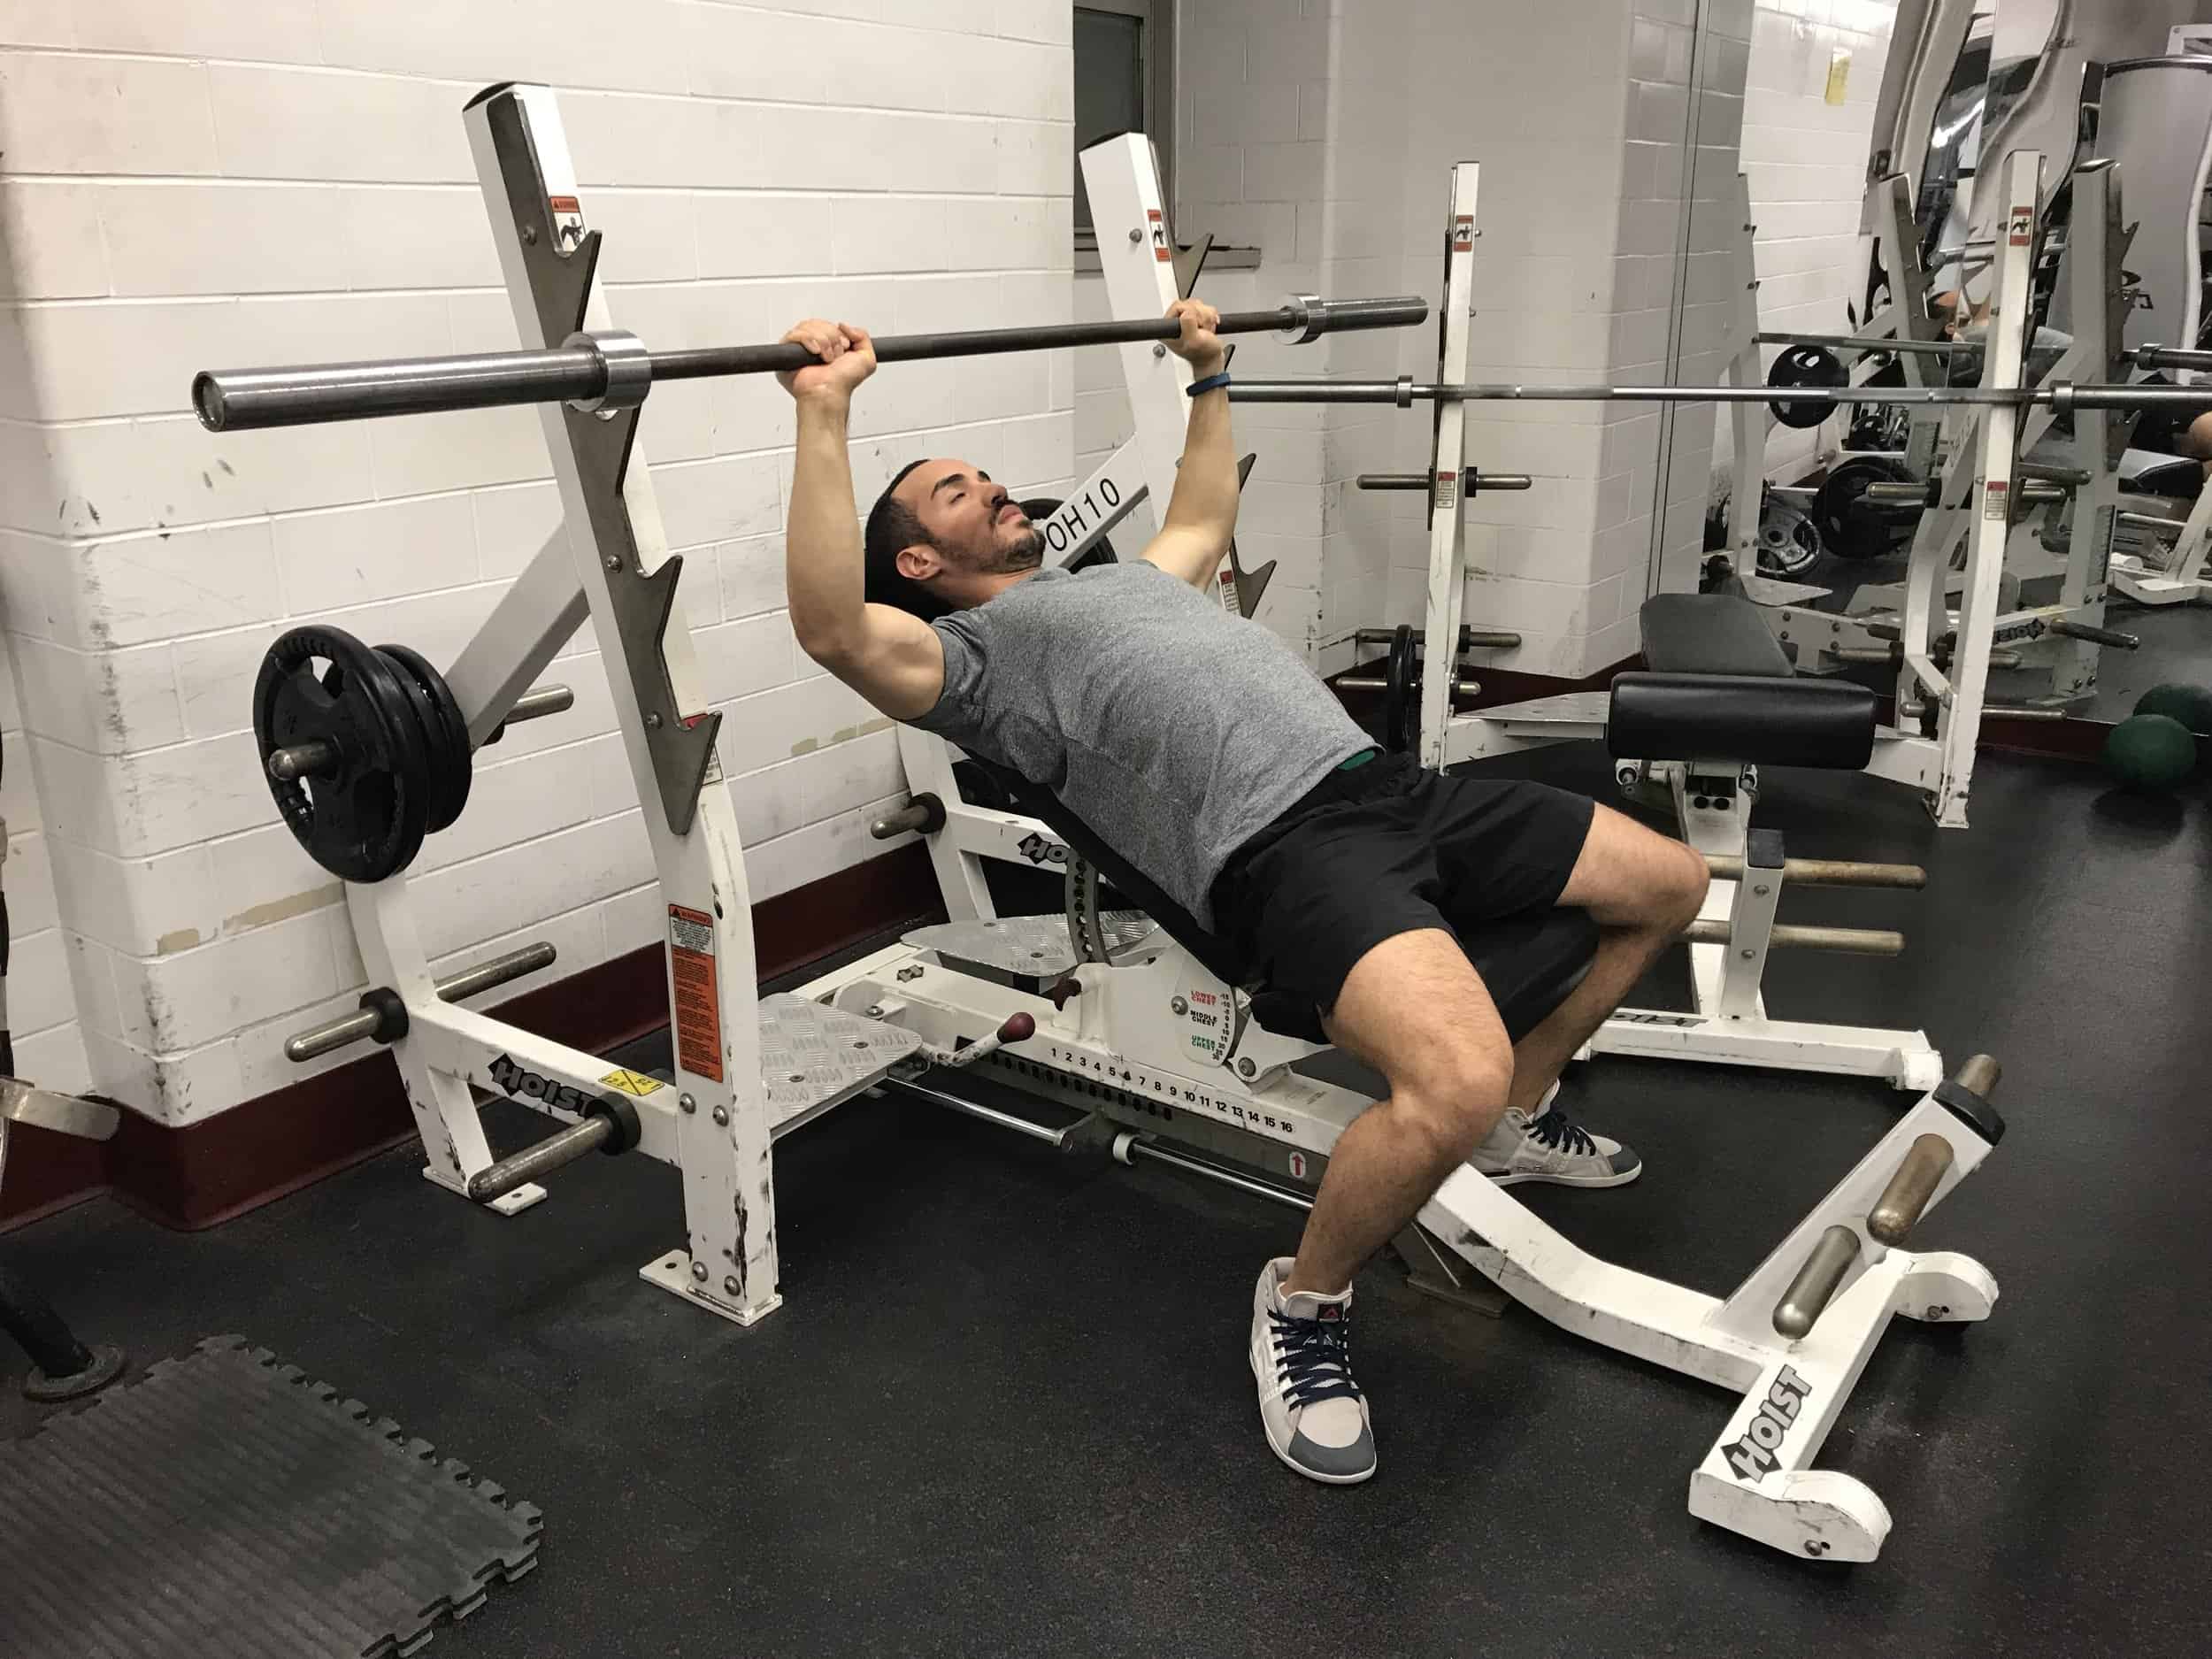 incline-bench-press-incorrect-form as elbows are flaring out to 90 degrees to the body